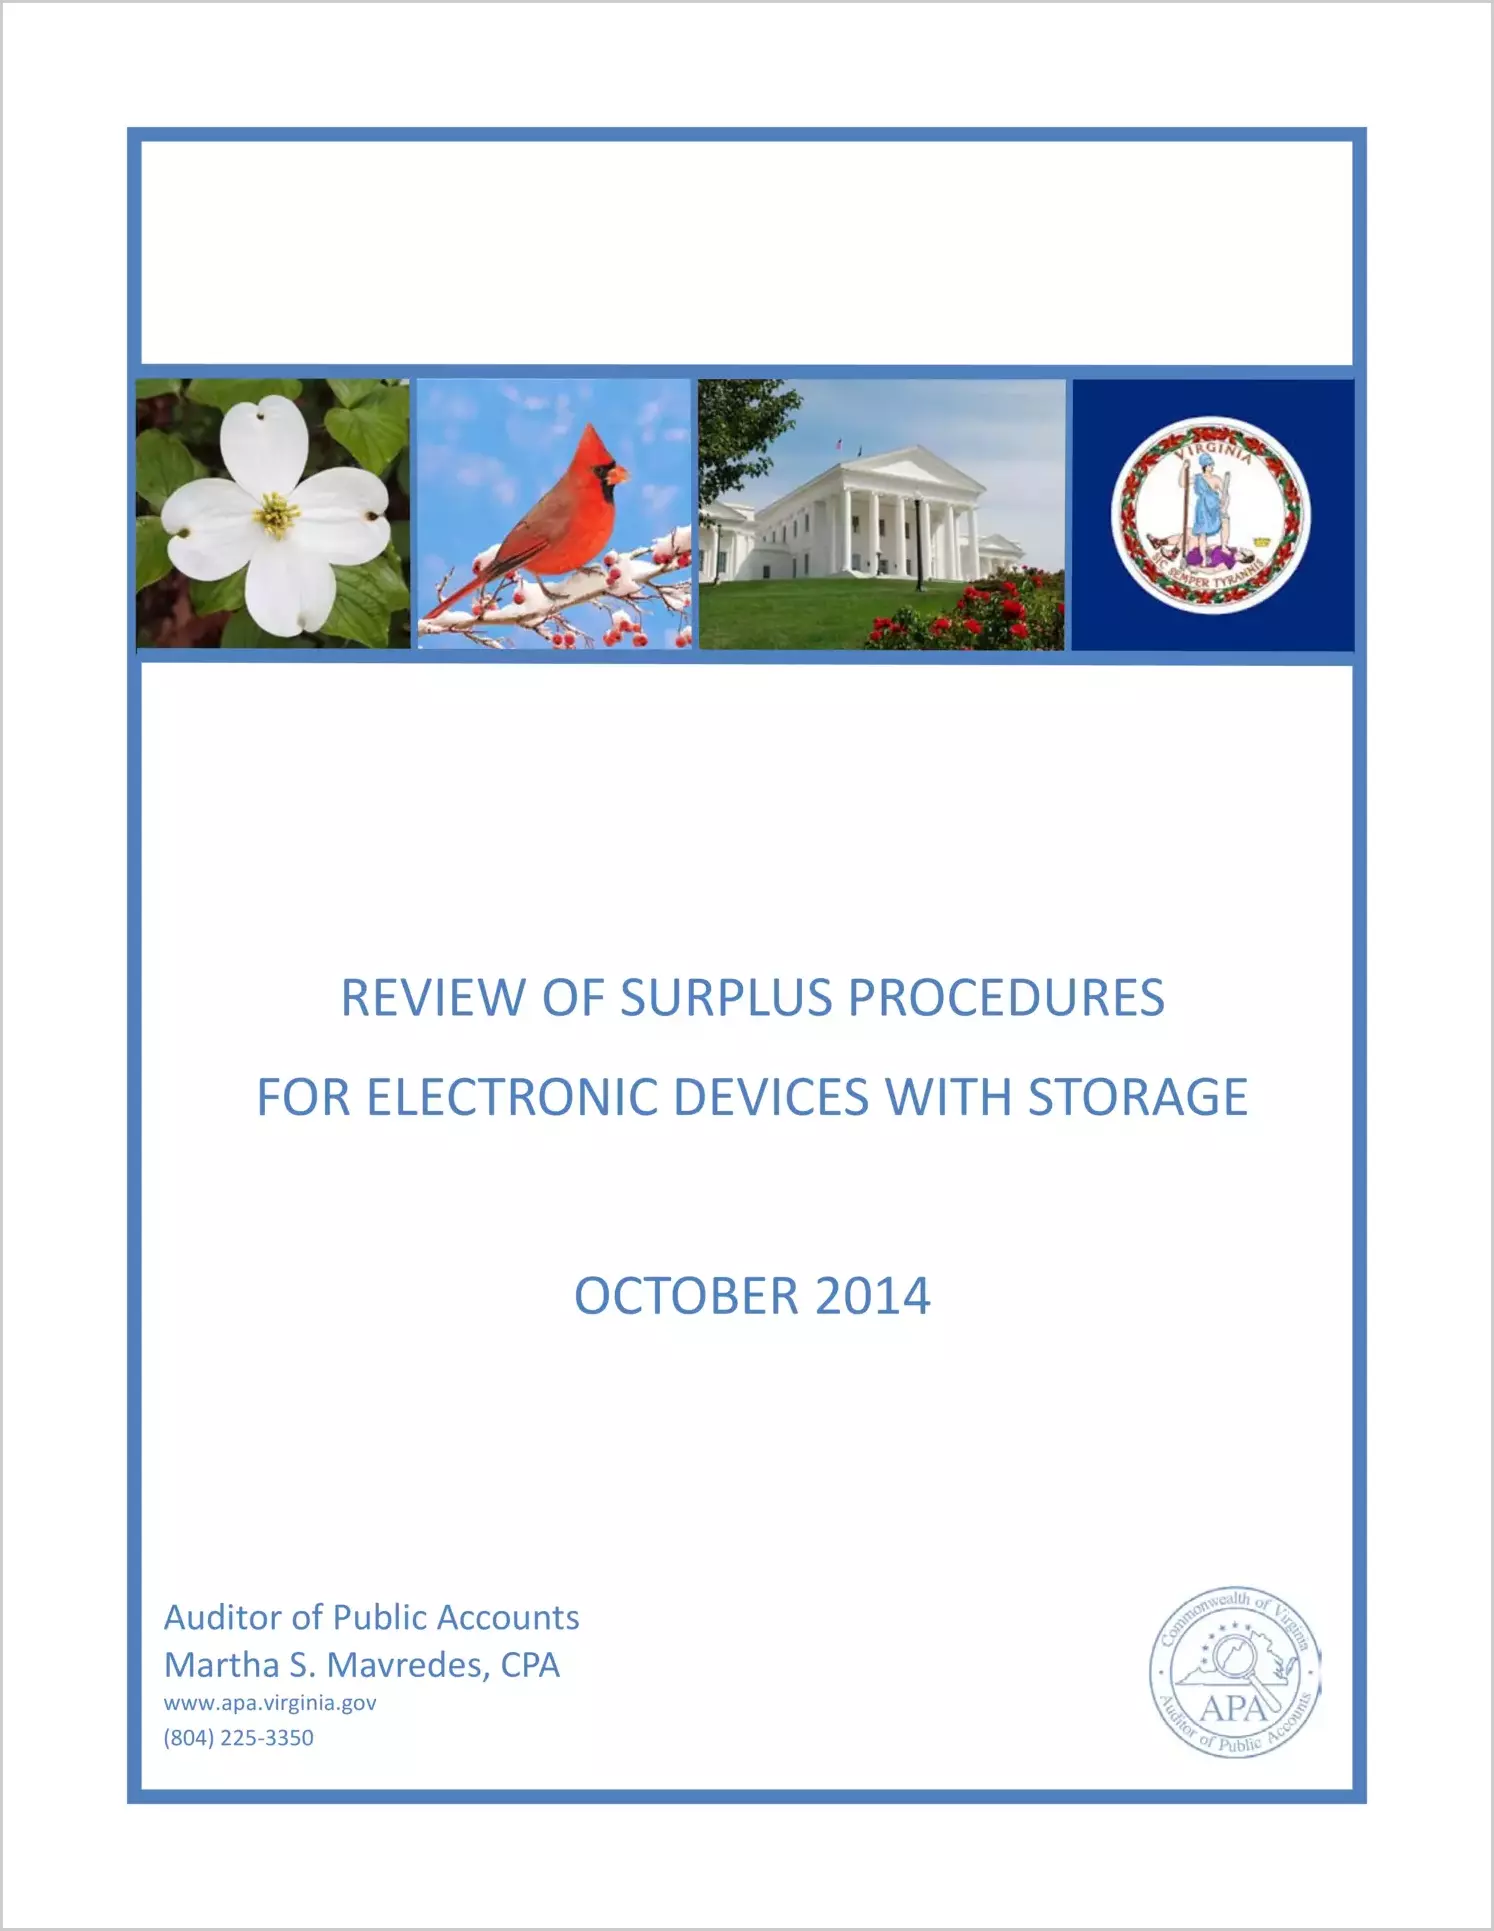 Review of Surplus Procedures for Electronic Devices with Storage - October 2014